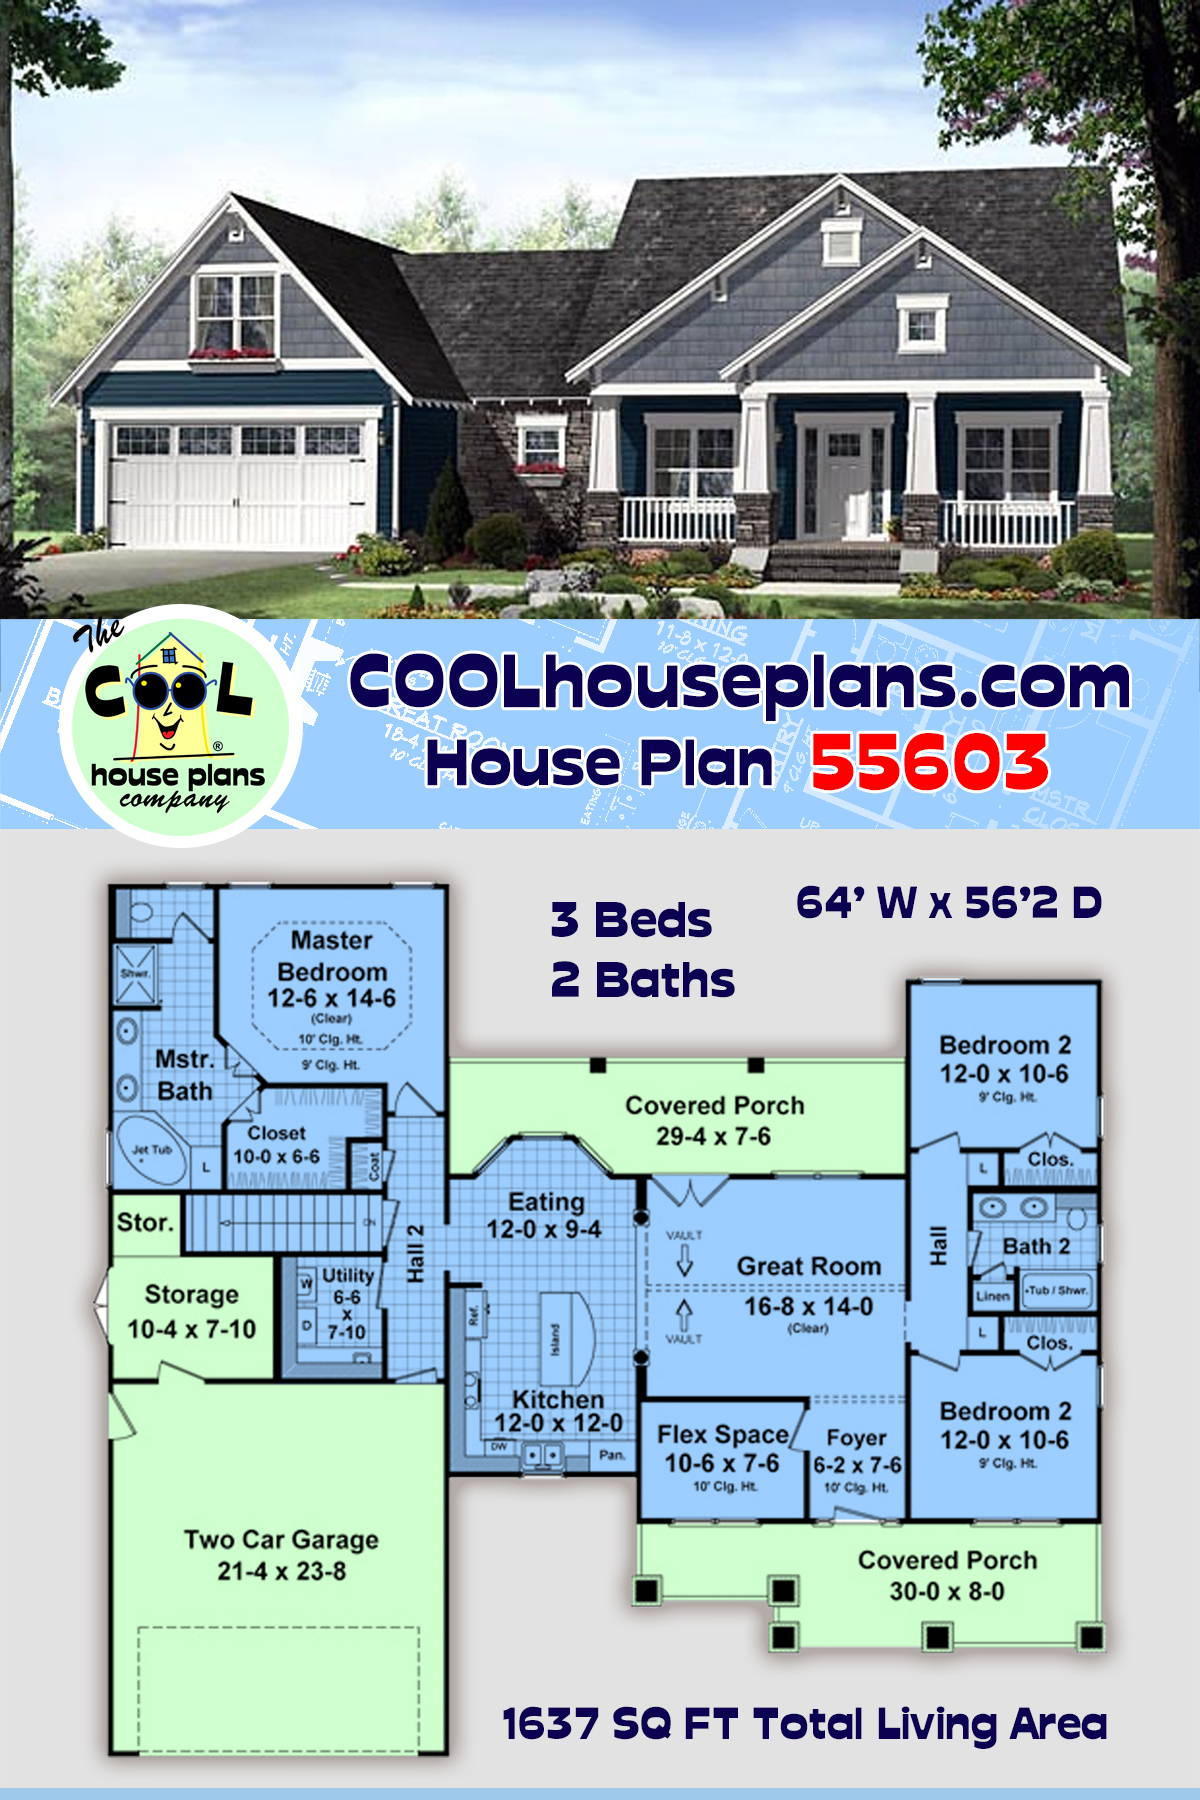 Cottage, Country, Craftsman House Plan 55603 with 3 Beds, 2 Baths, 2 Car Garage